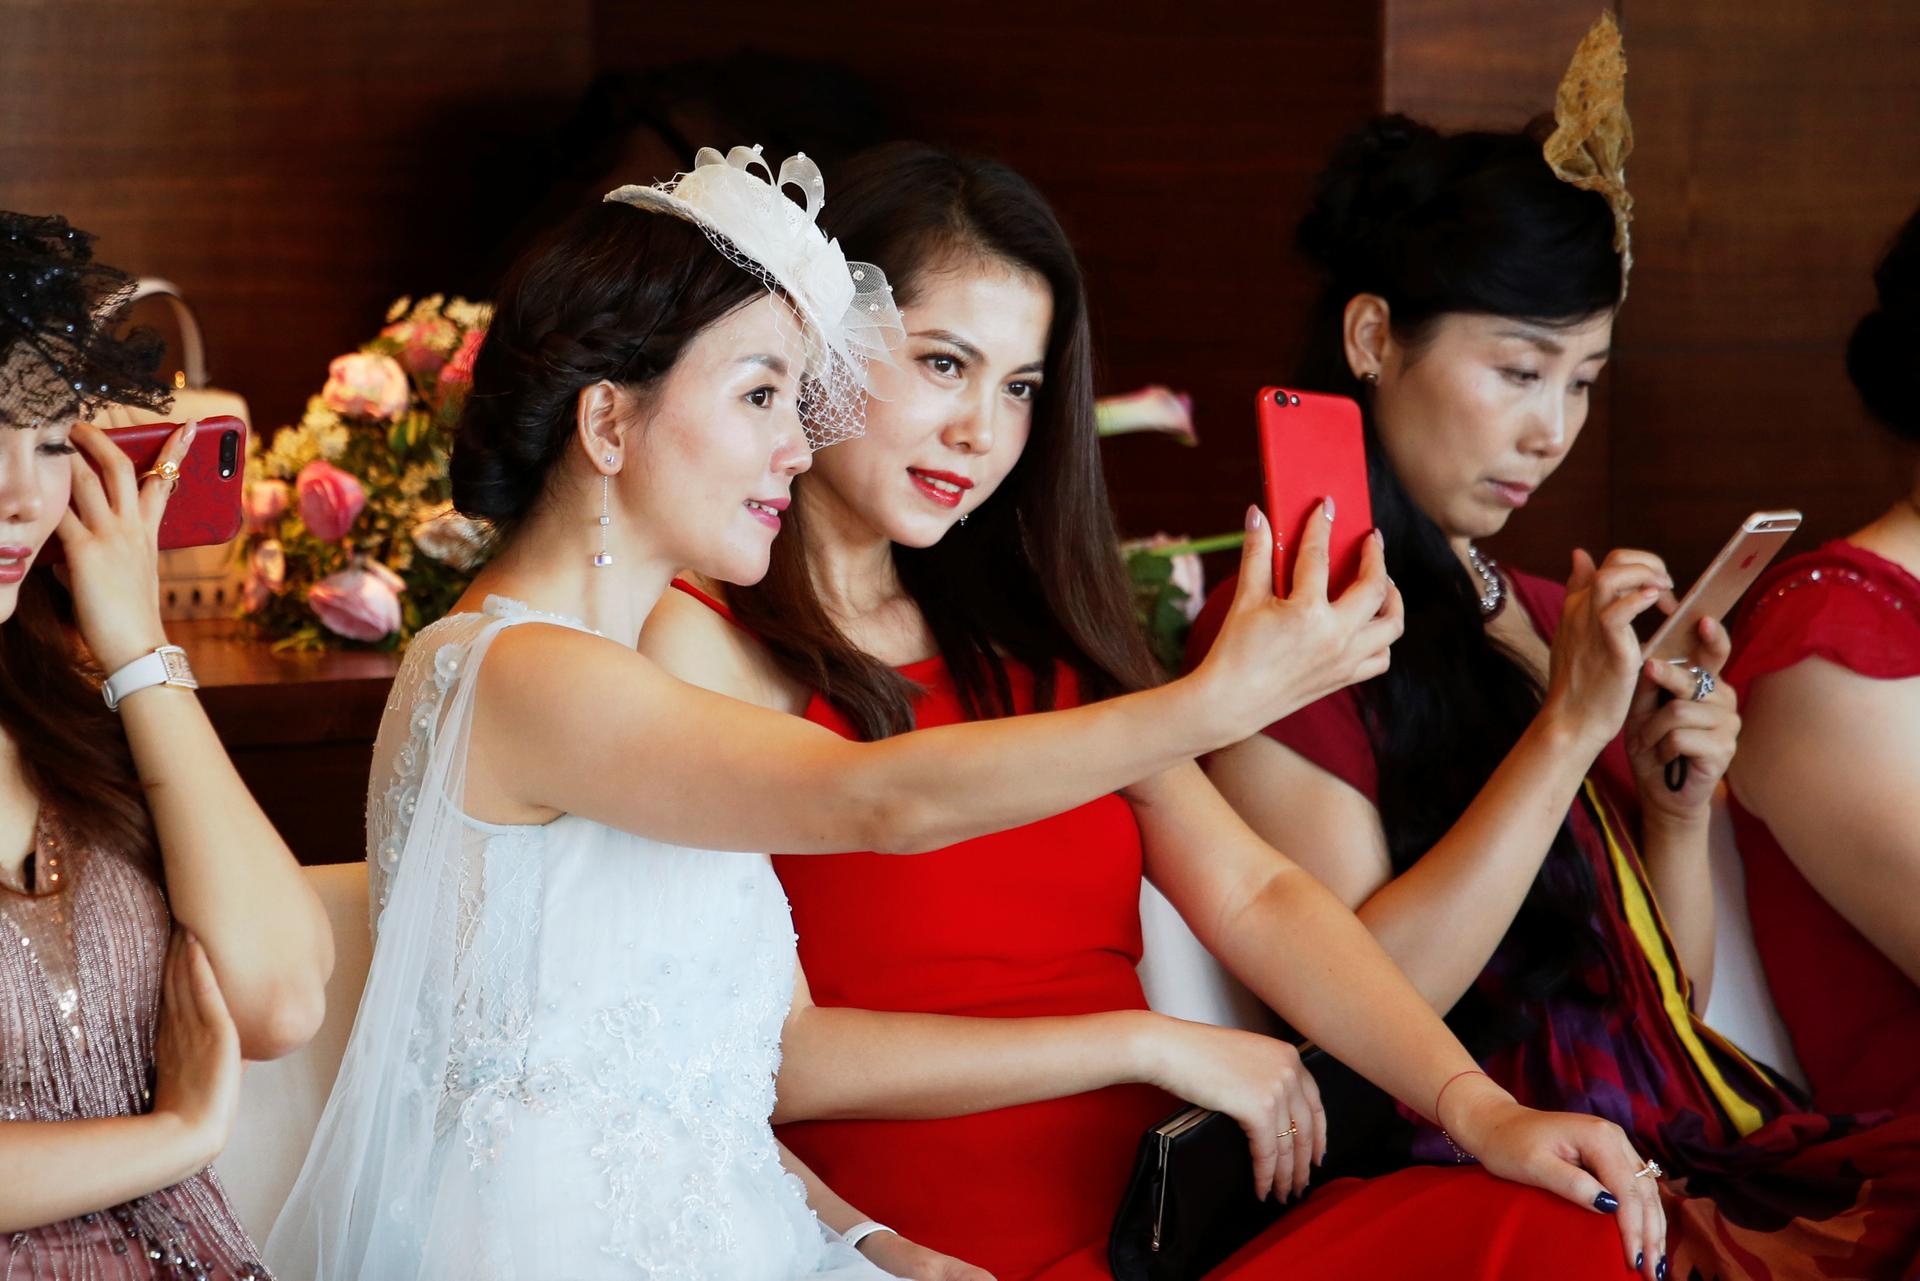 Participants take a selfie during an etiquette class by former Australian model June Dally-Watkins in Guangzhou, China October 8, 2017.